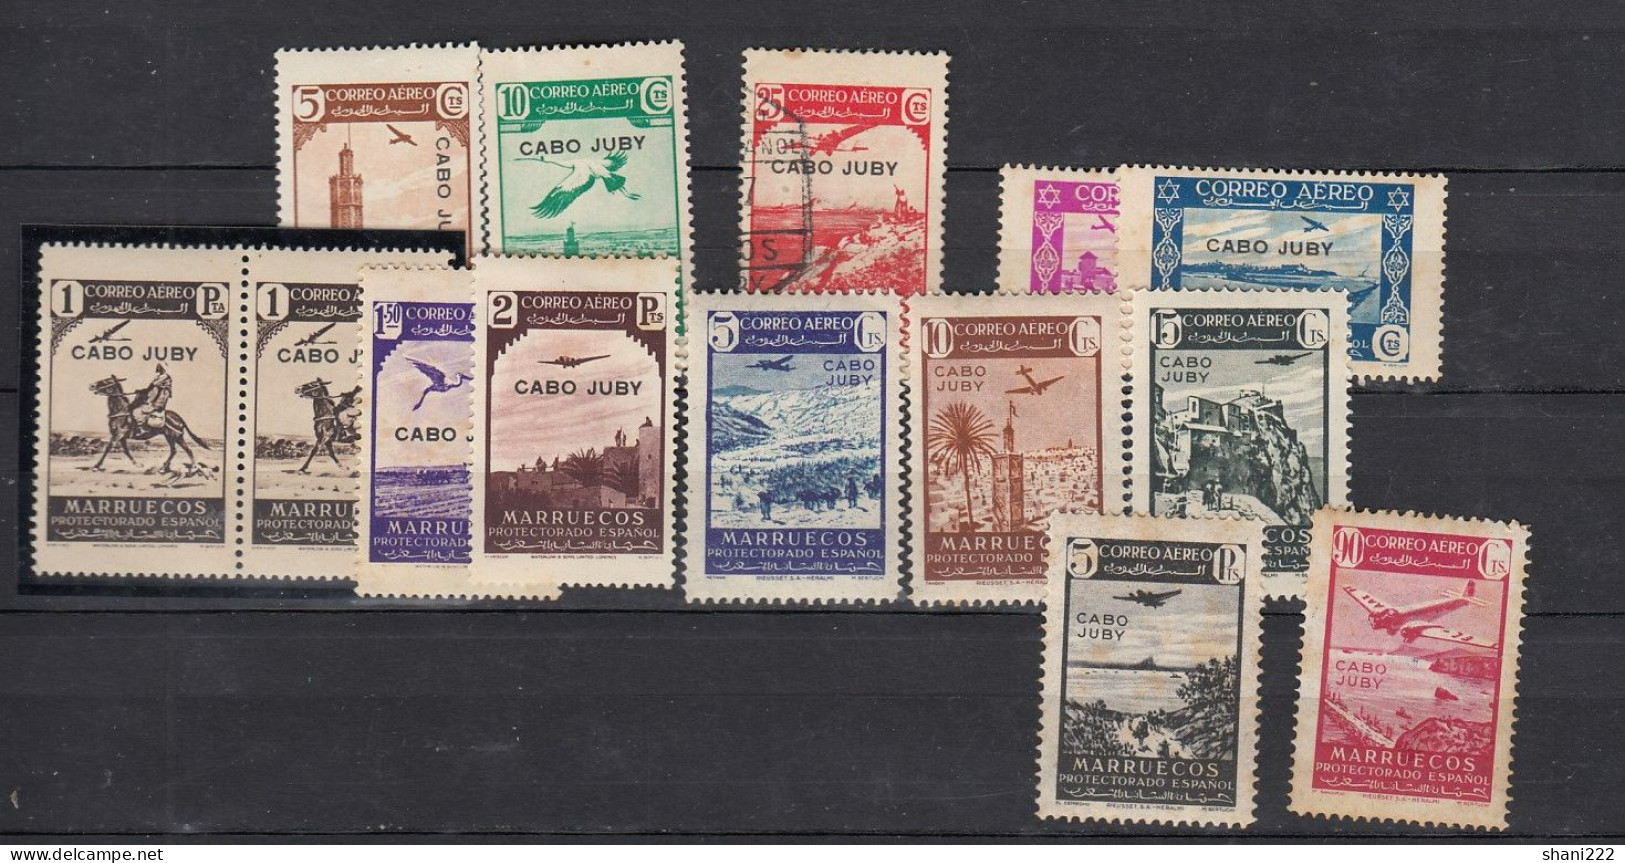 Spain - Cabo Juby - 1938-42 - Airs -  MH (2-156) - Kaap Juby